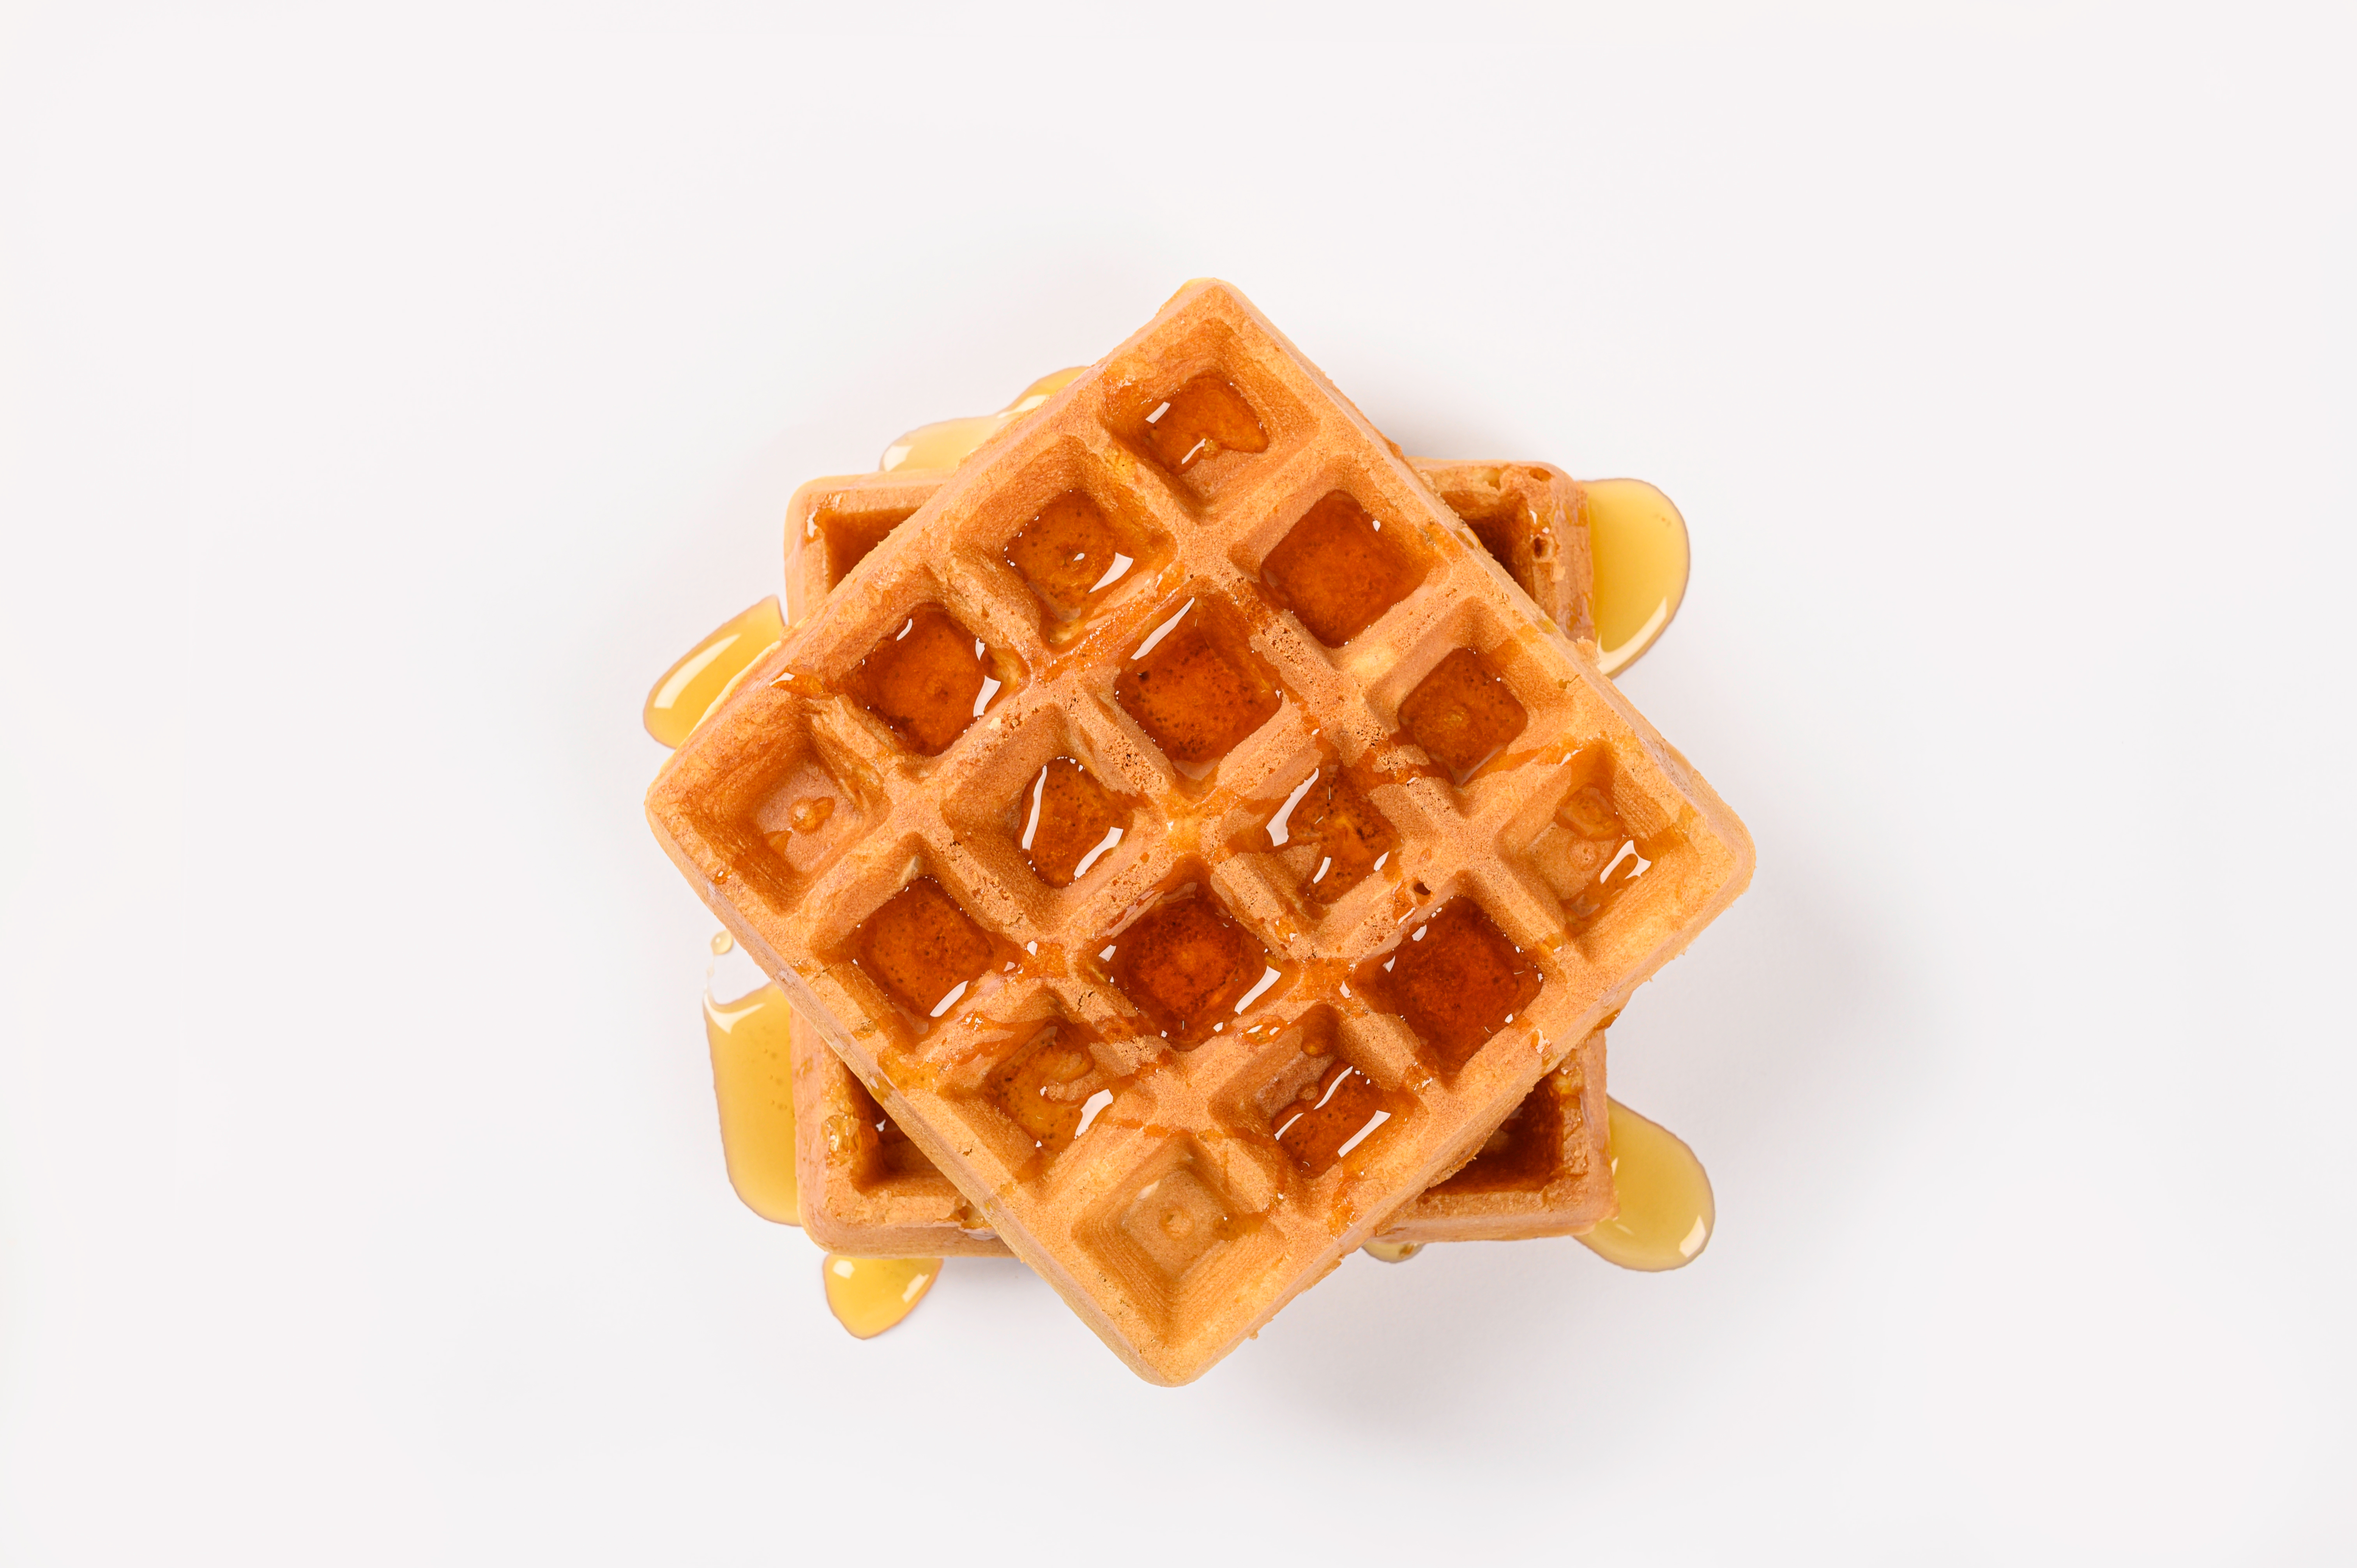 A pile of waffles with syrup on them | Source: Shutterstock